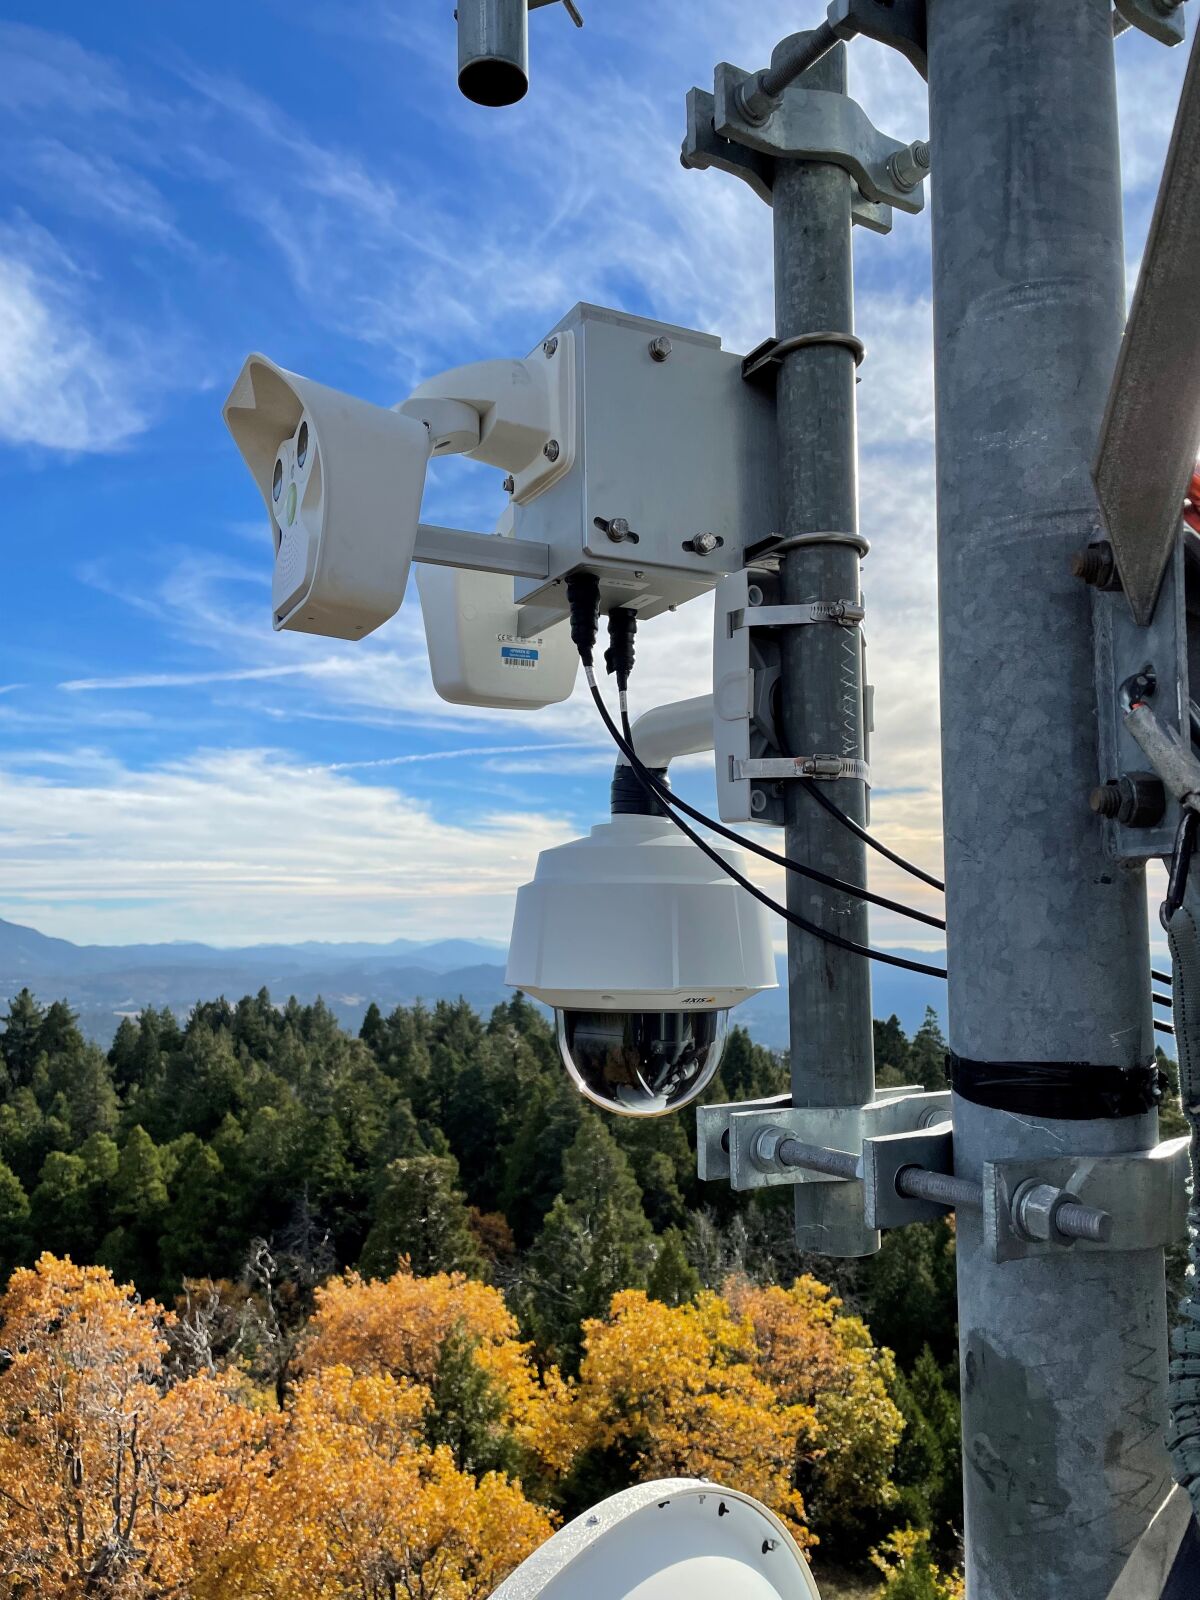 New HPWREN and ALERTWildfire cameras deployed on Volcan Mountain in early November 2021.